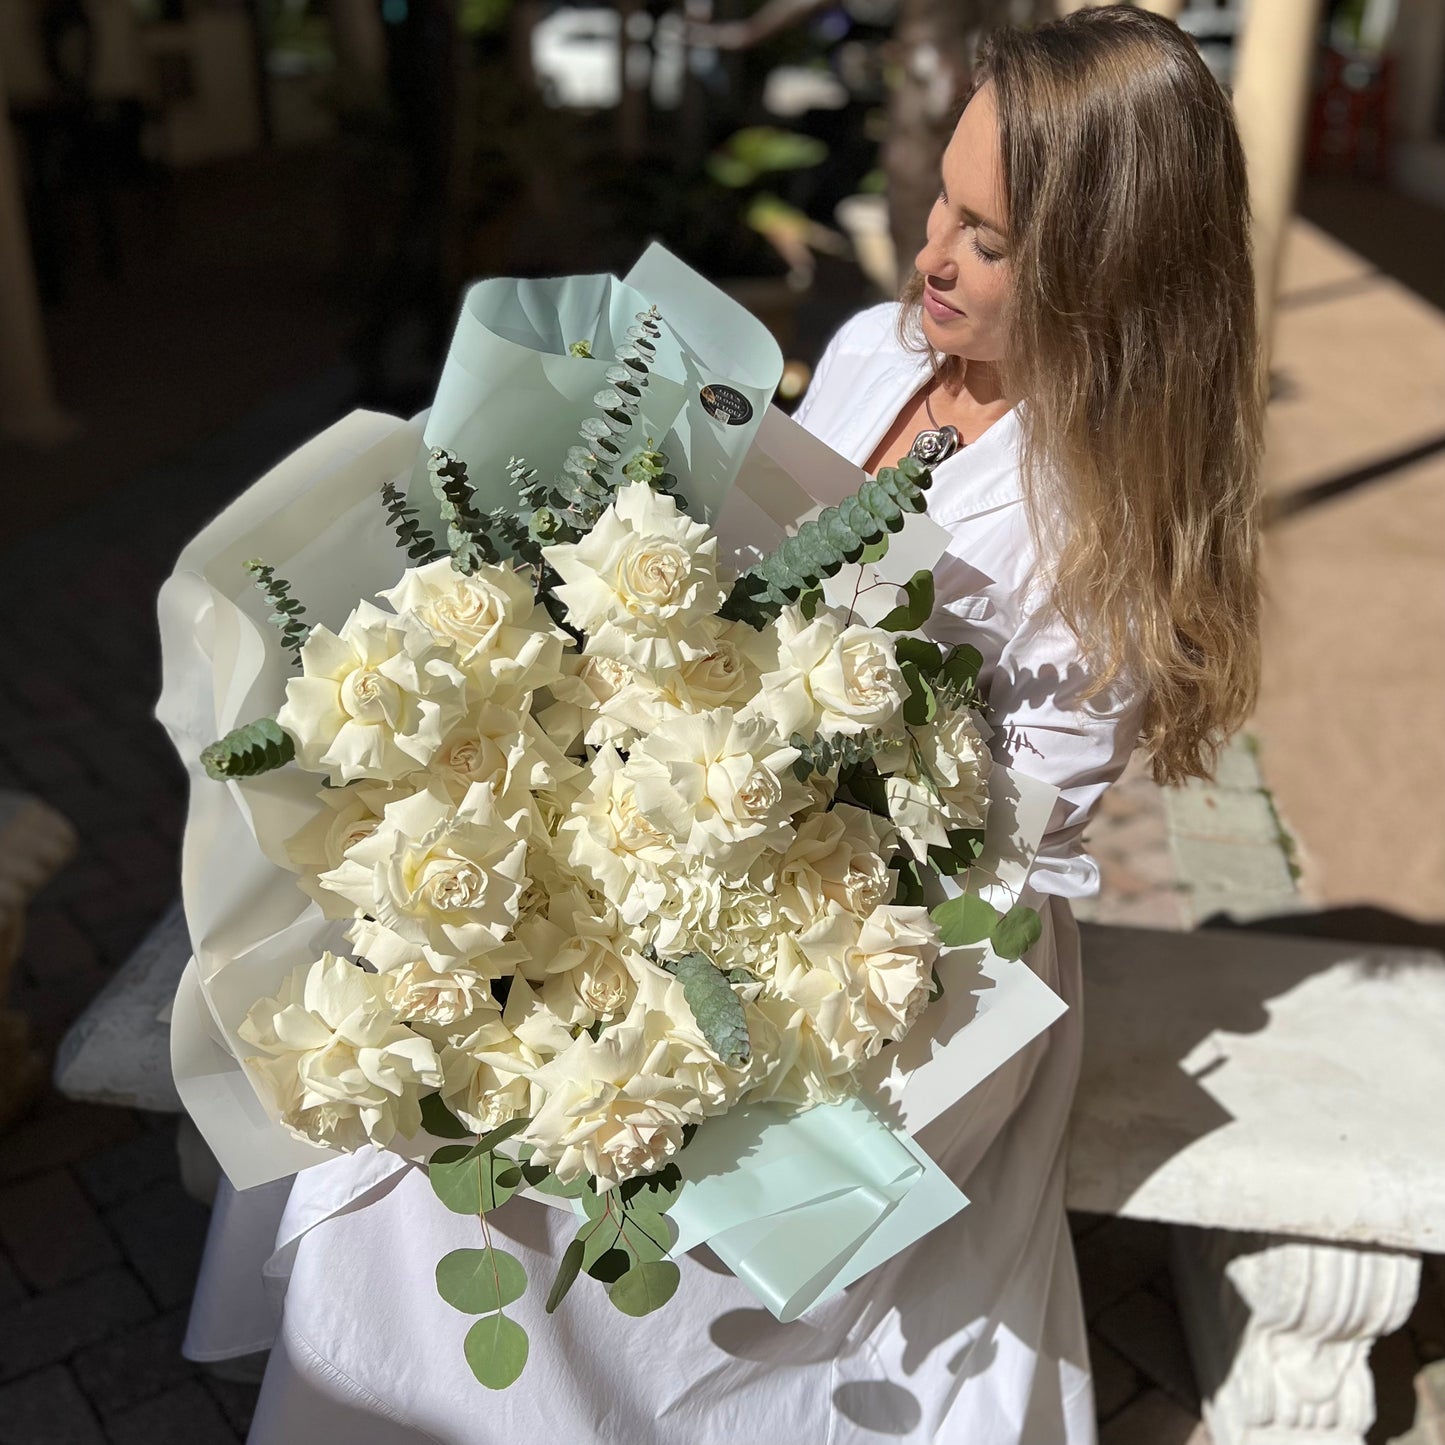 A beautiful woman with a gorgeous bouquet of white flowers